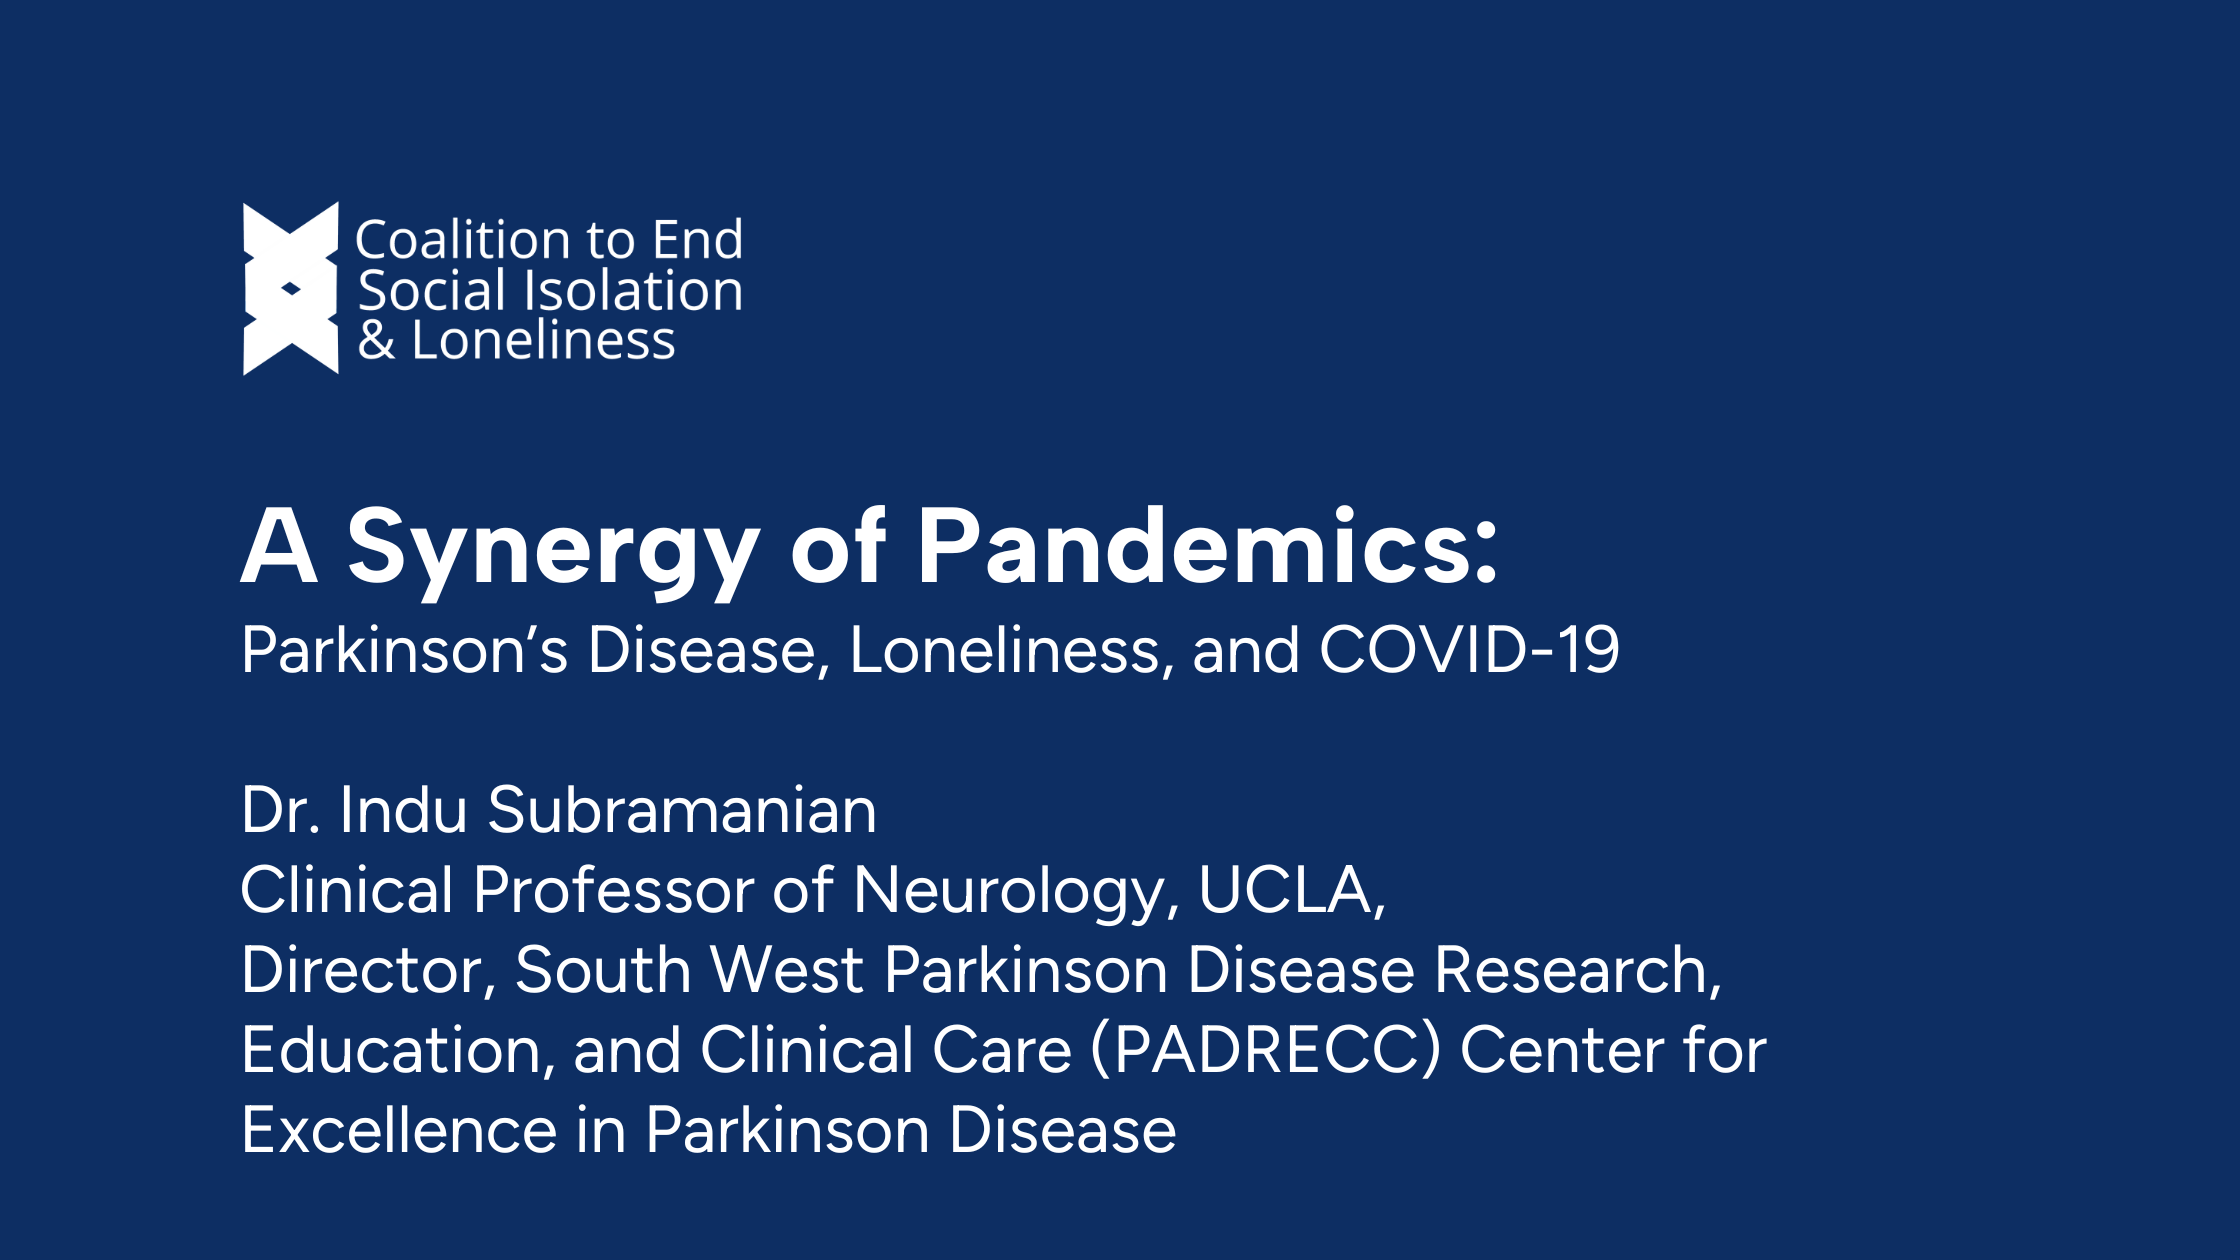 A Synergy of Pandemics – Parkinson’s Disease, Loneliness, and COVID-19